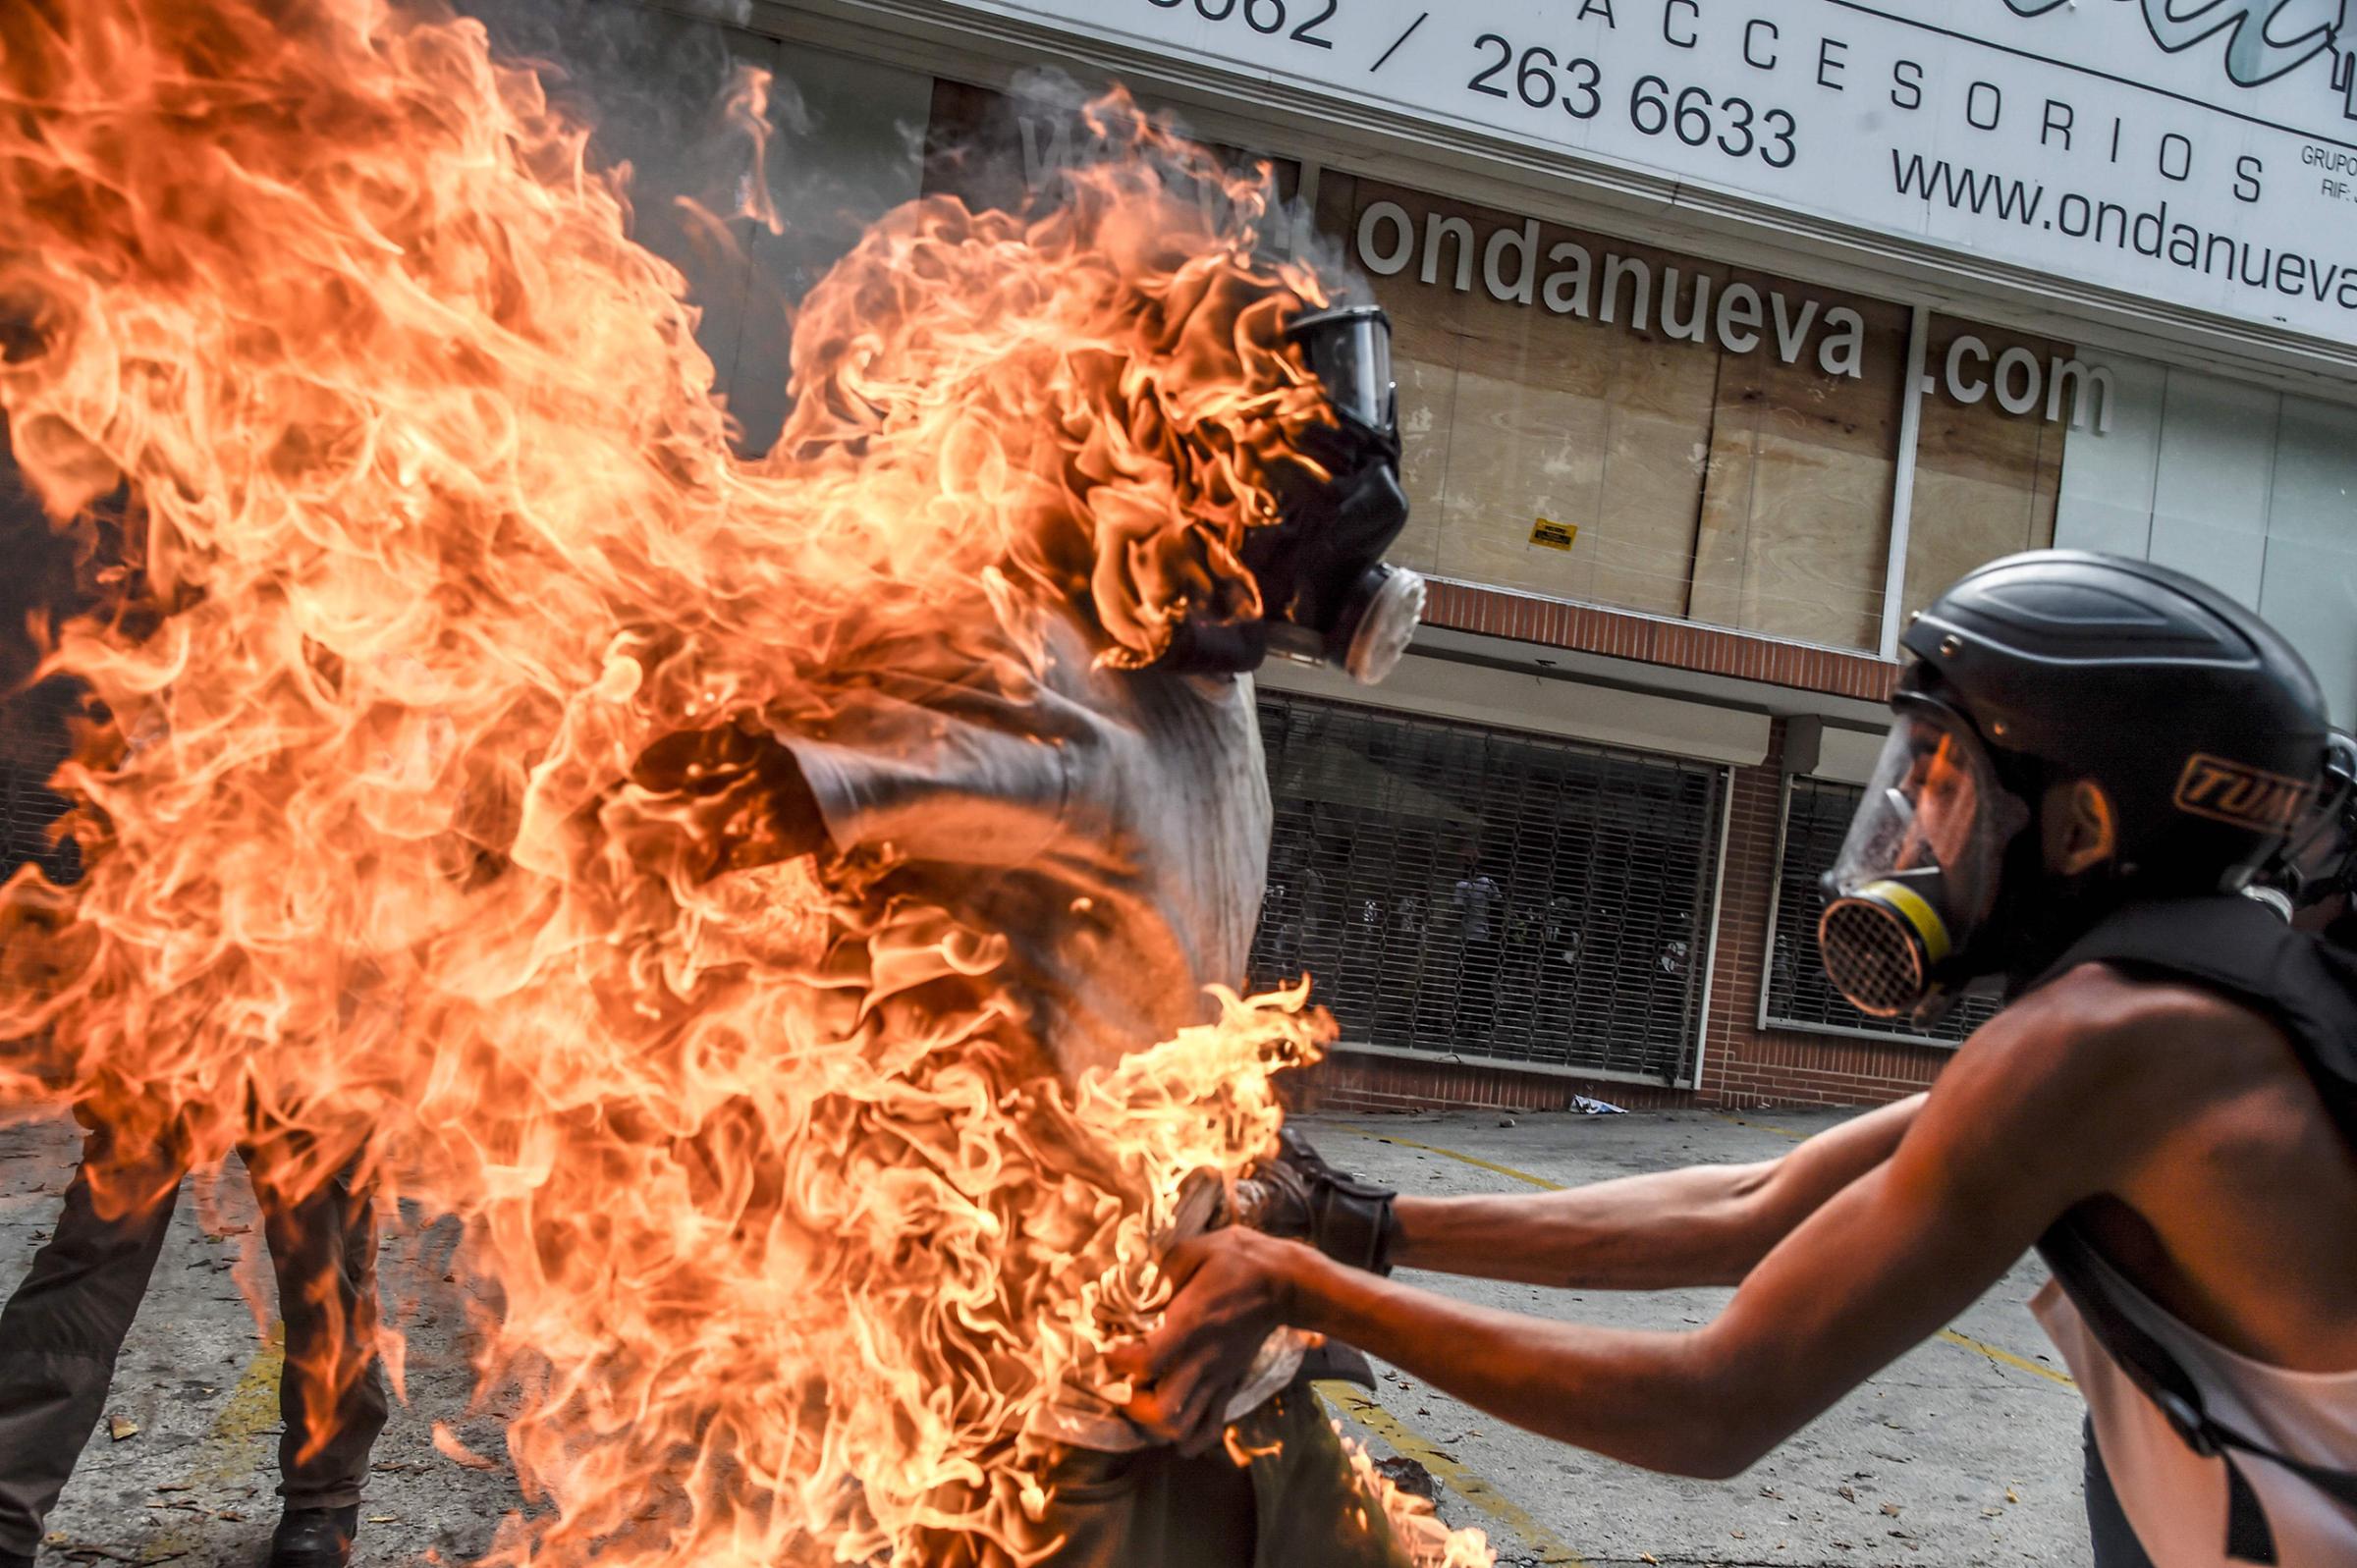 A demonstrator lifts the shirt off of a man who was accidentally set ablaze in Caracas on May 3, 2017.